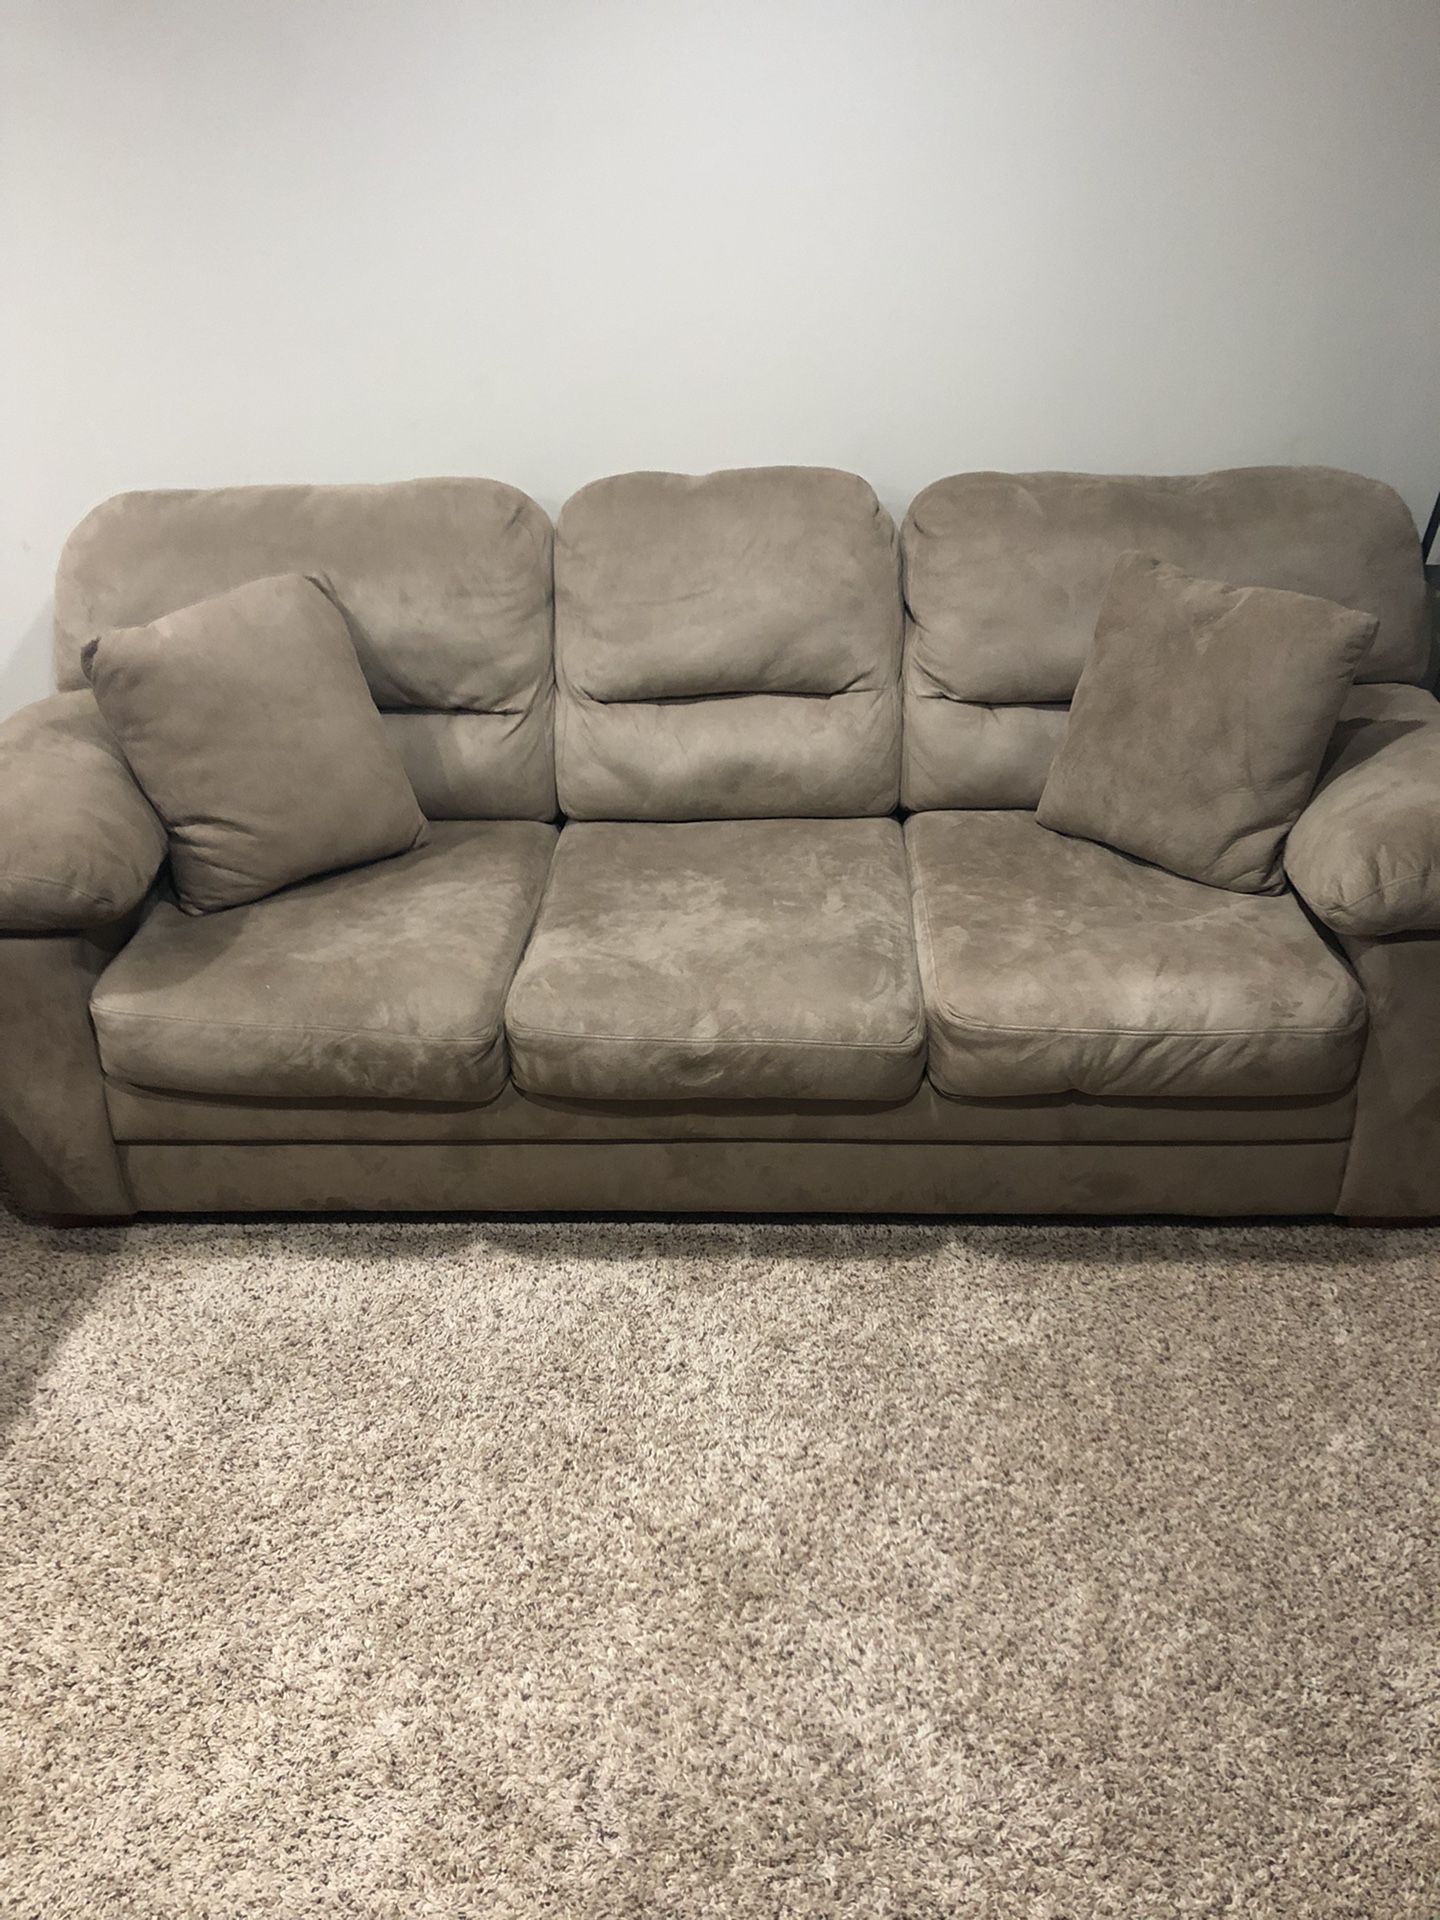 Living Room Couch, Loveseat & Chair Set